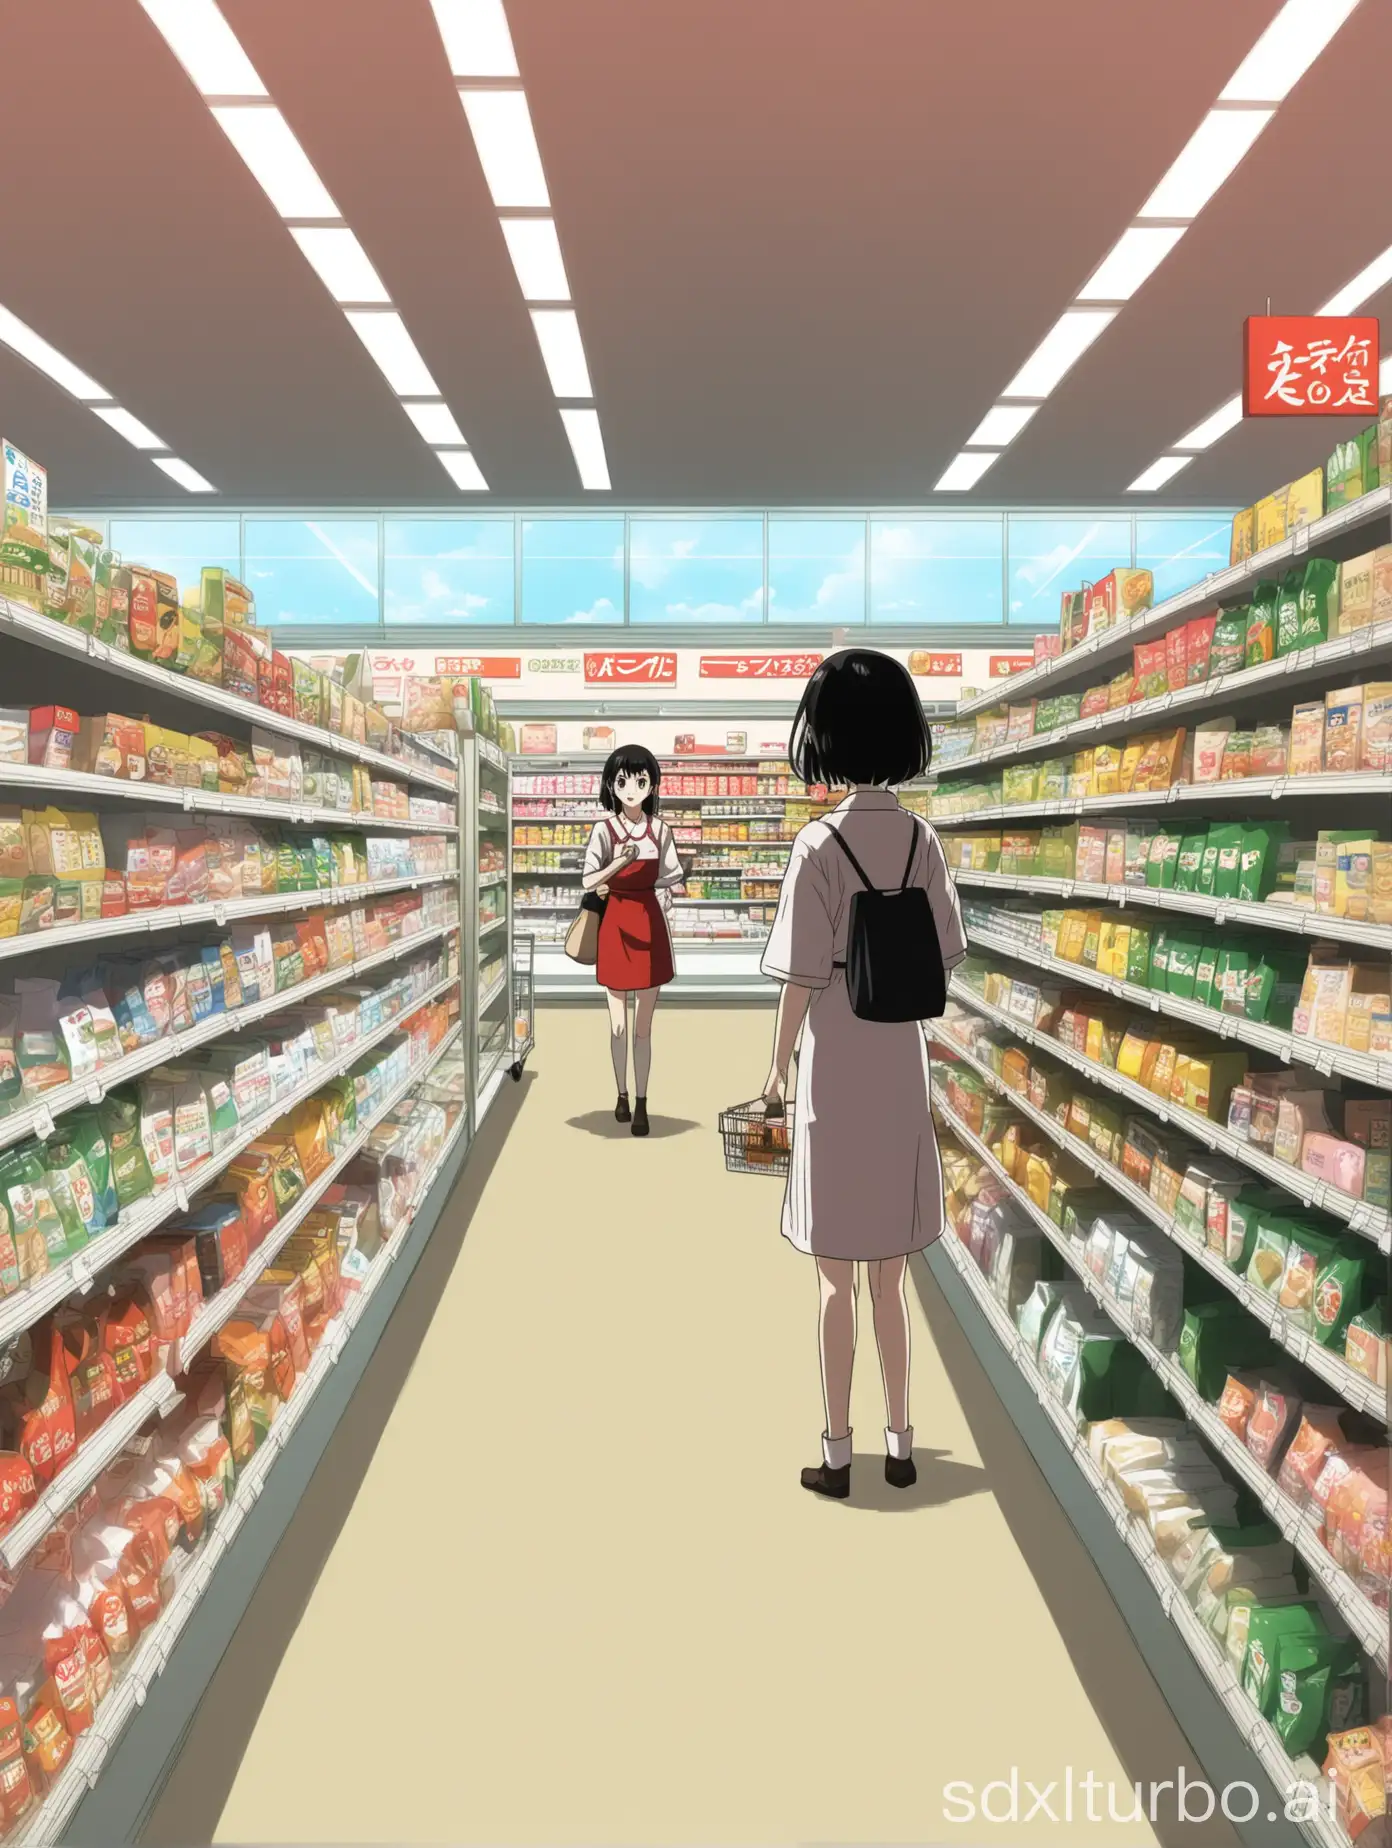 anime style japanese supermarket with customer in the background